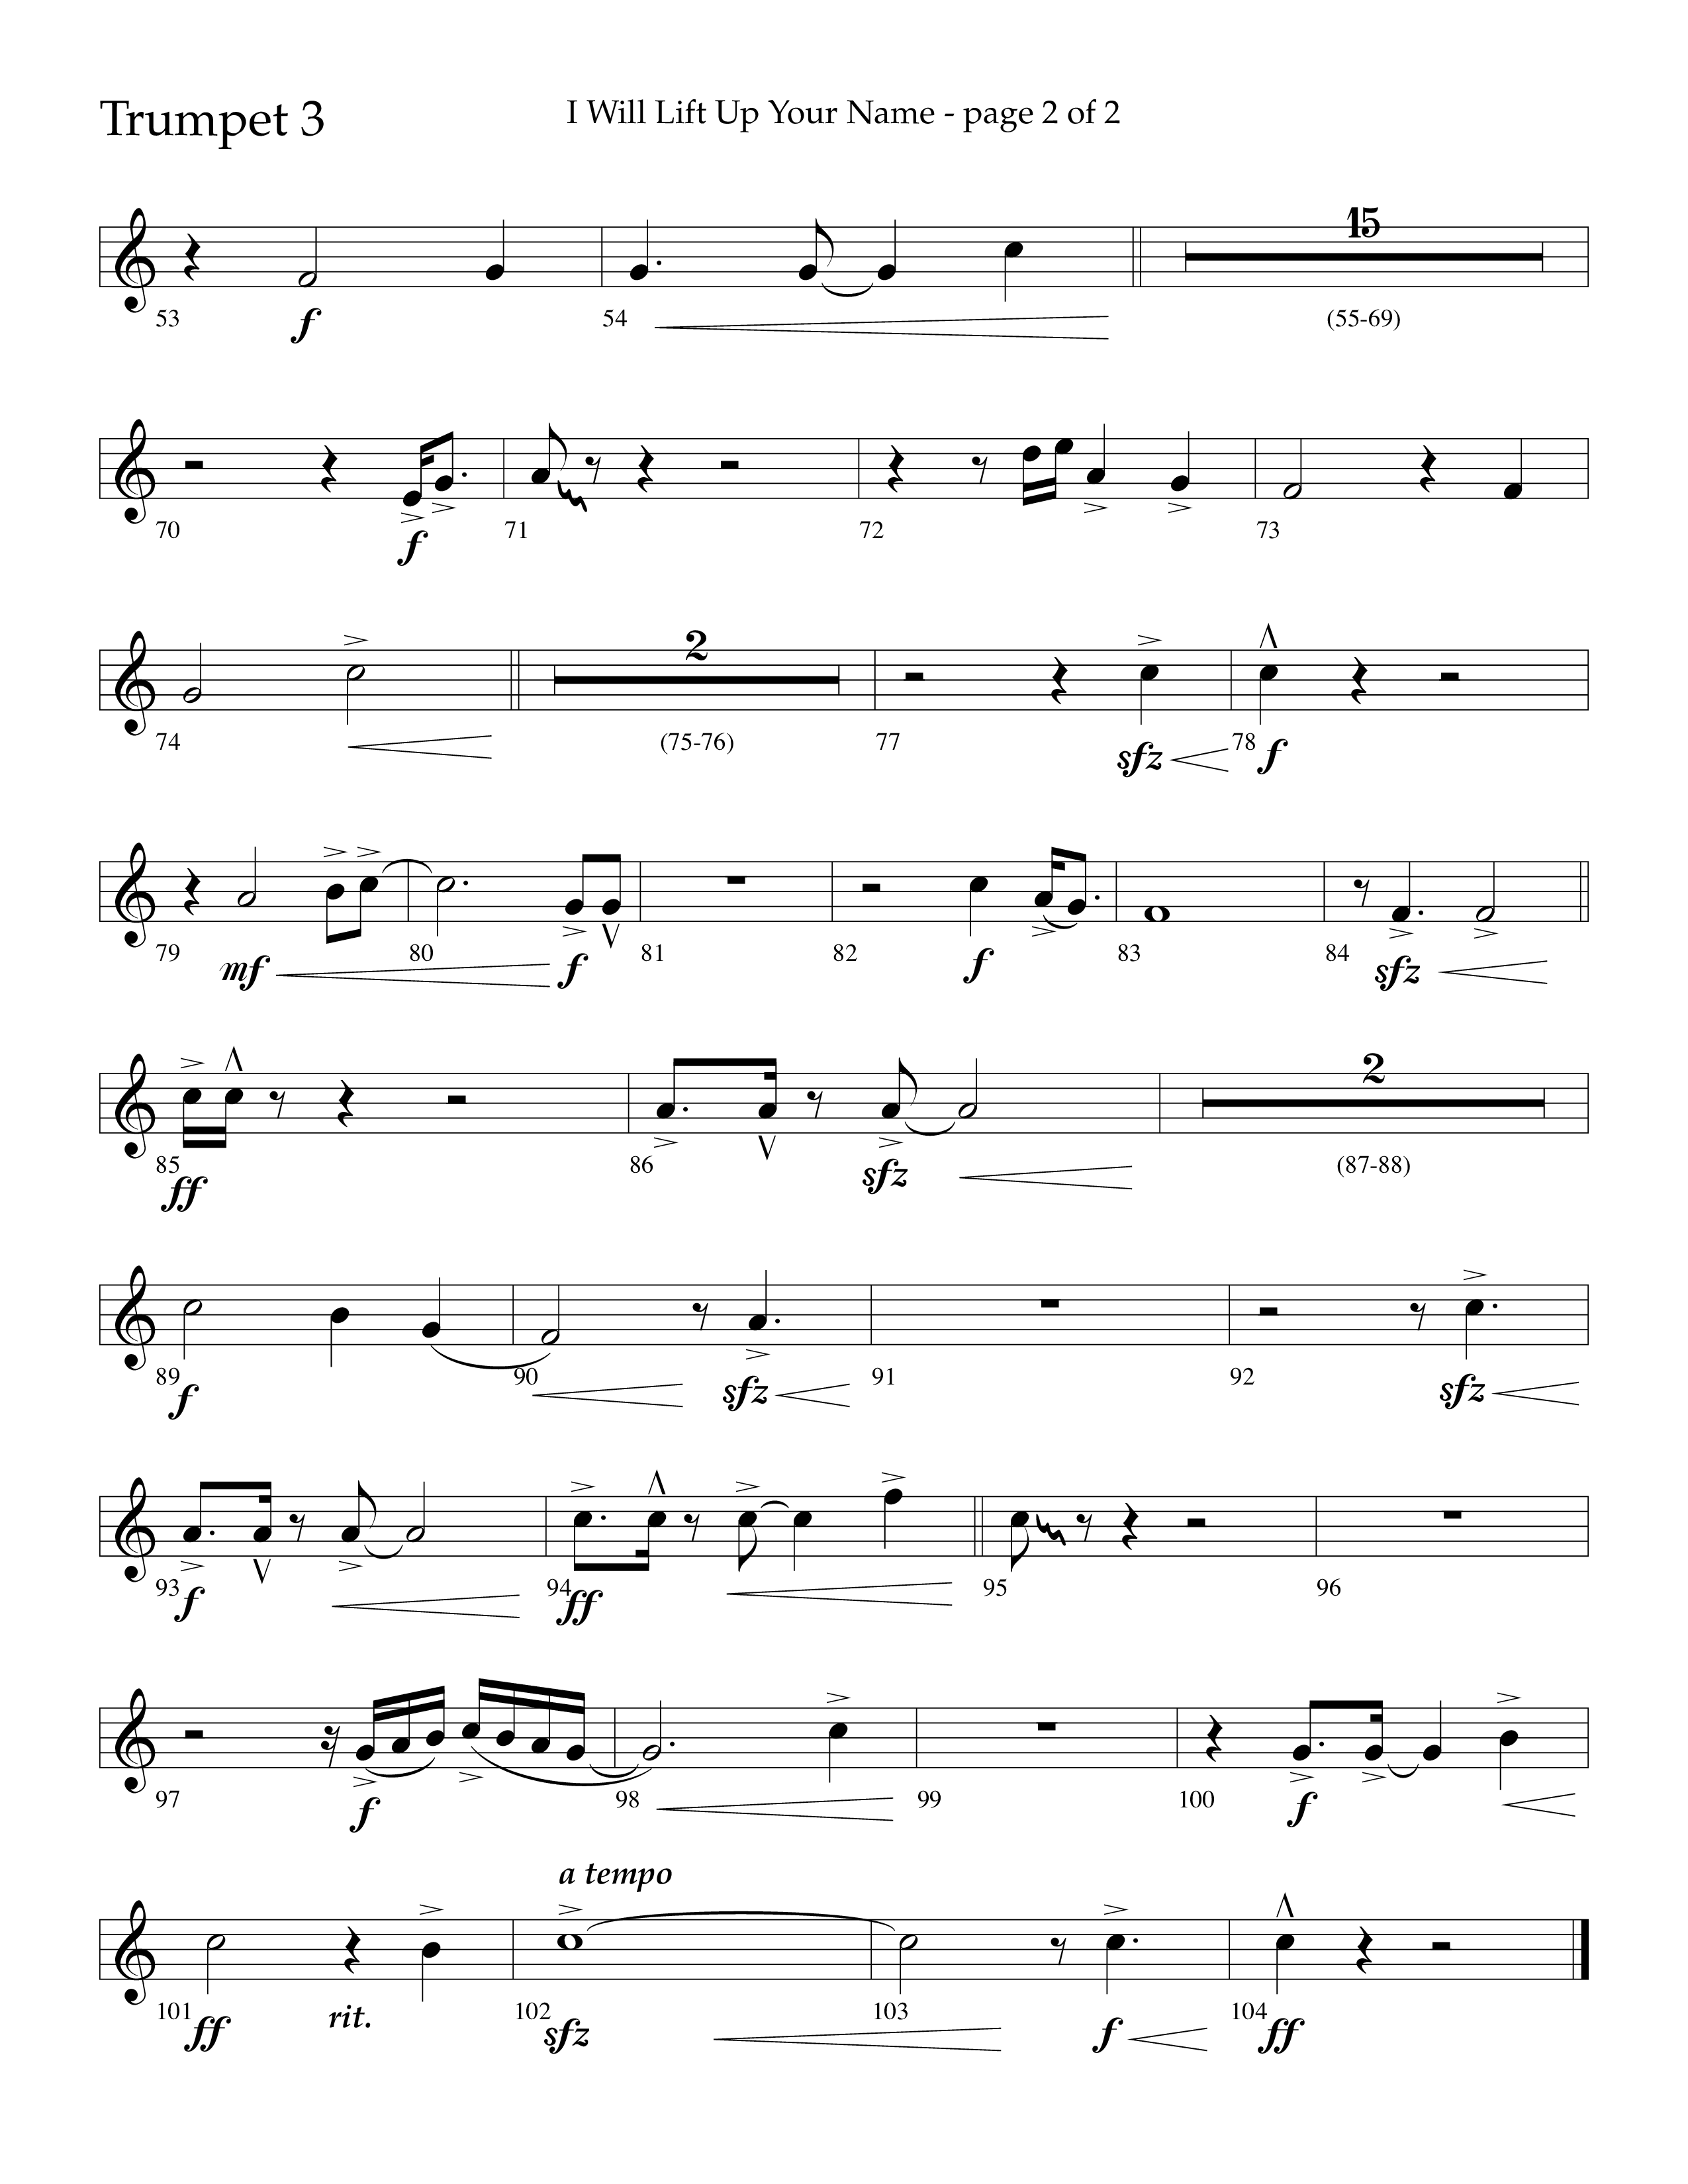 I Will Lift Up Your Name (Choral Anthem SATB) Trumpet 3 (Lifeway Choral / Arr. John Bolin / Orch. Cliff Duren)